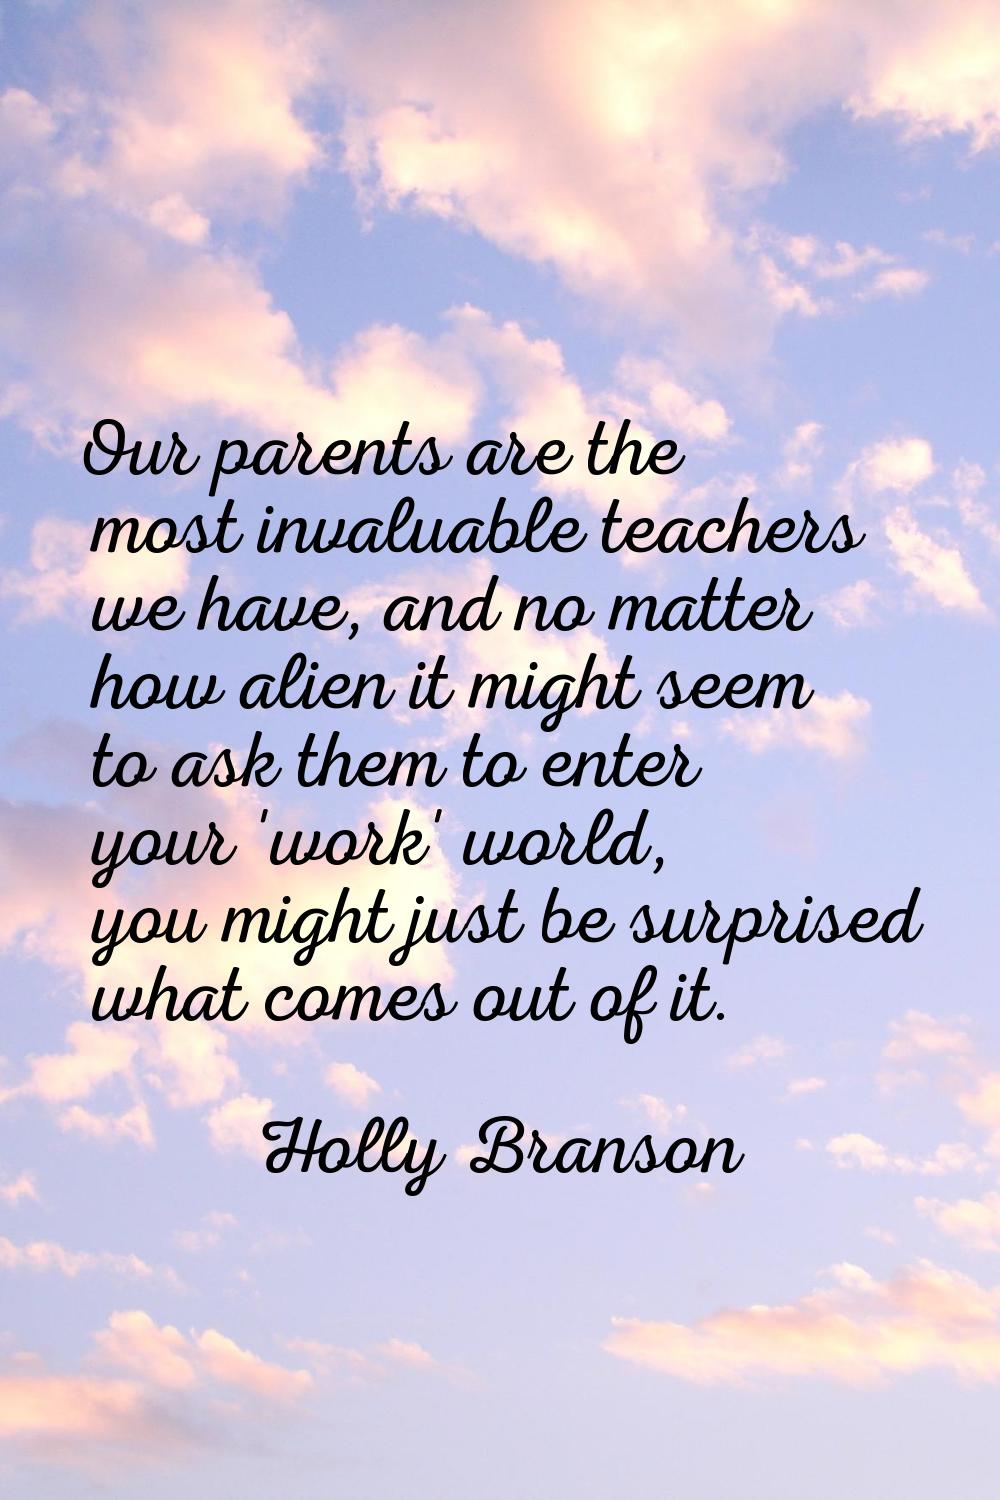 Our parents are the most invaluable teachers we have, and no matter how alien it might seem to ask 